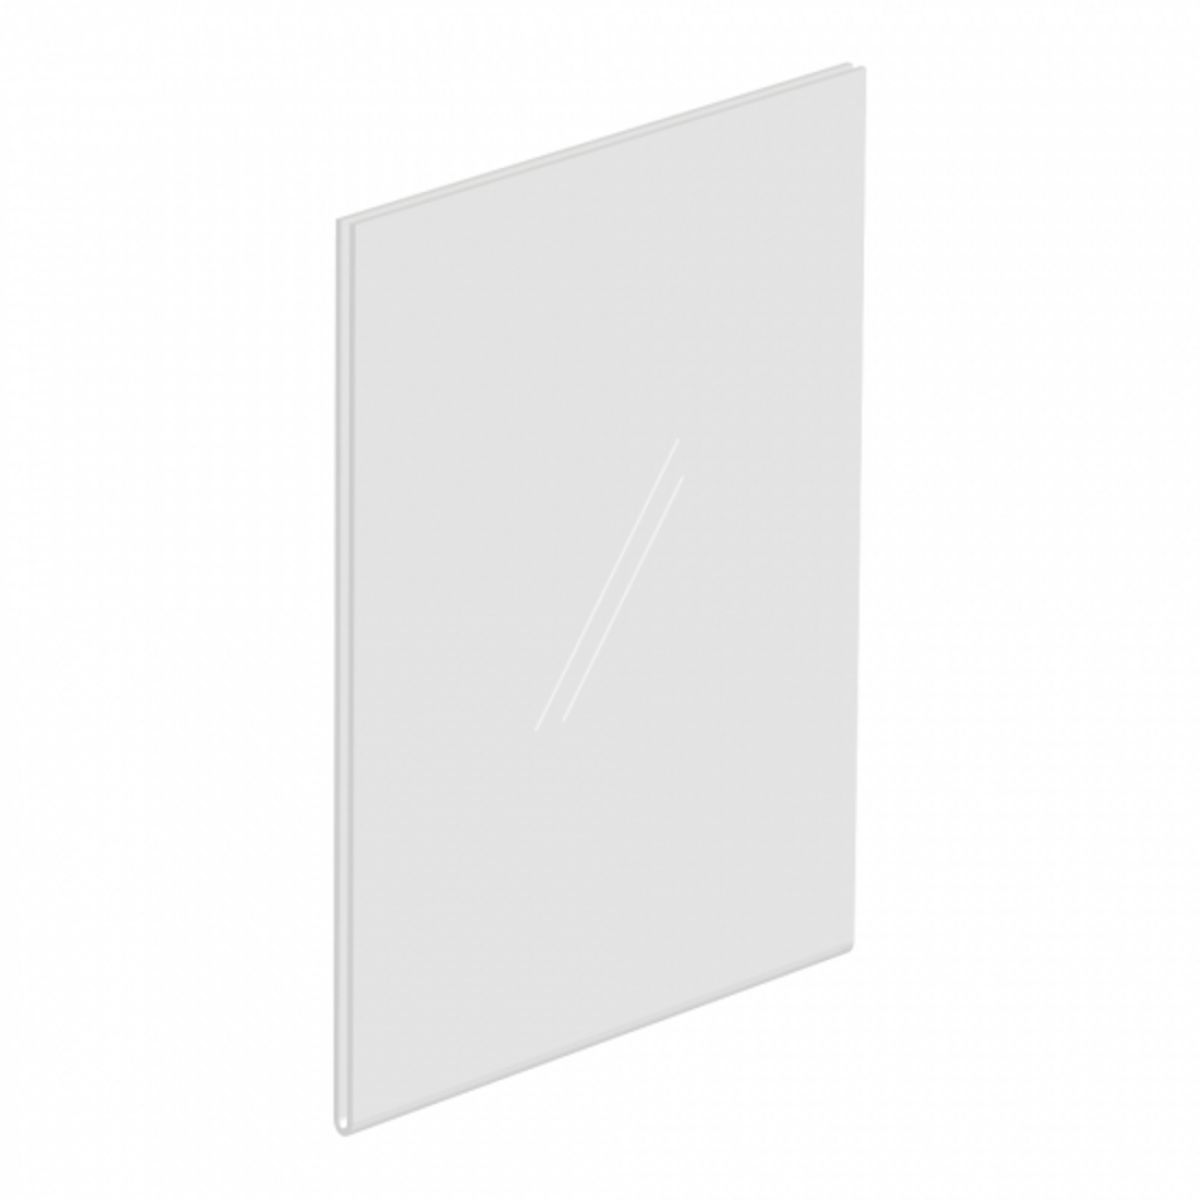 Portrait Acrylic Poster Sleeve.png